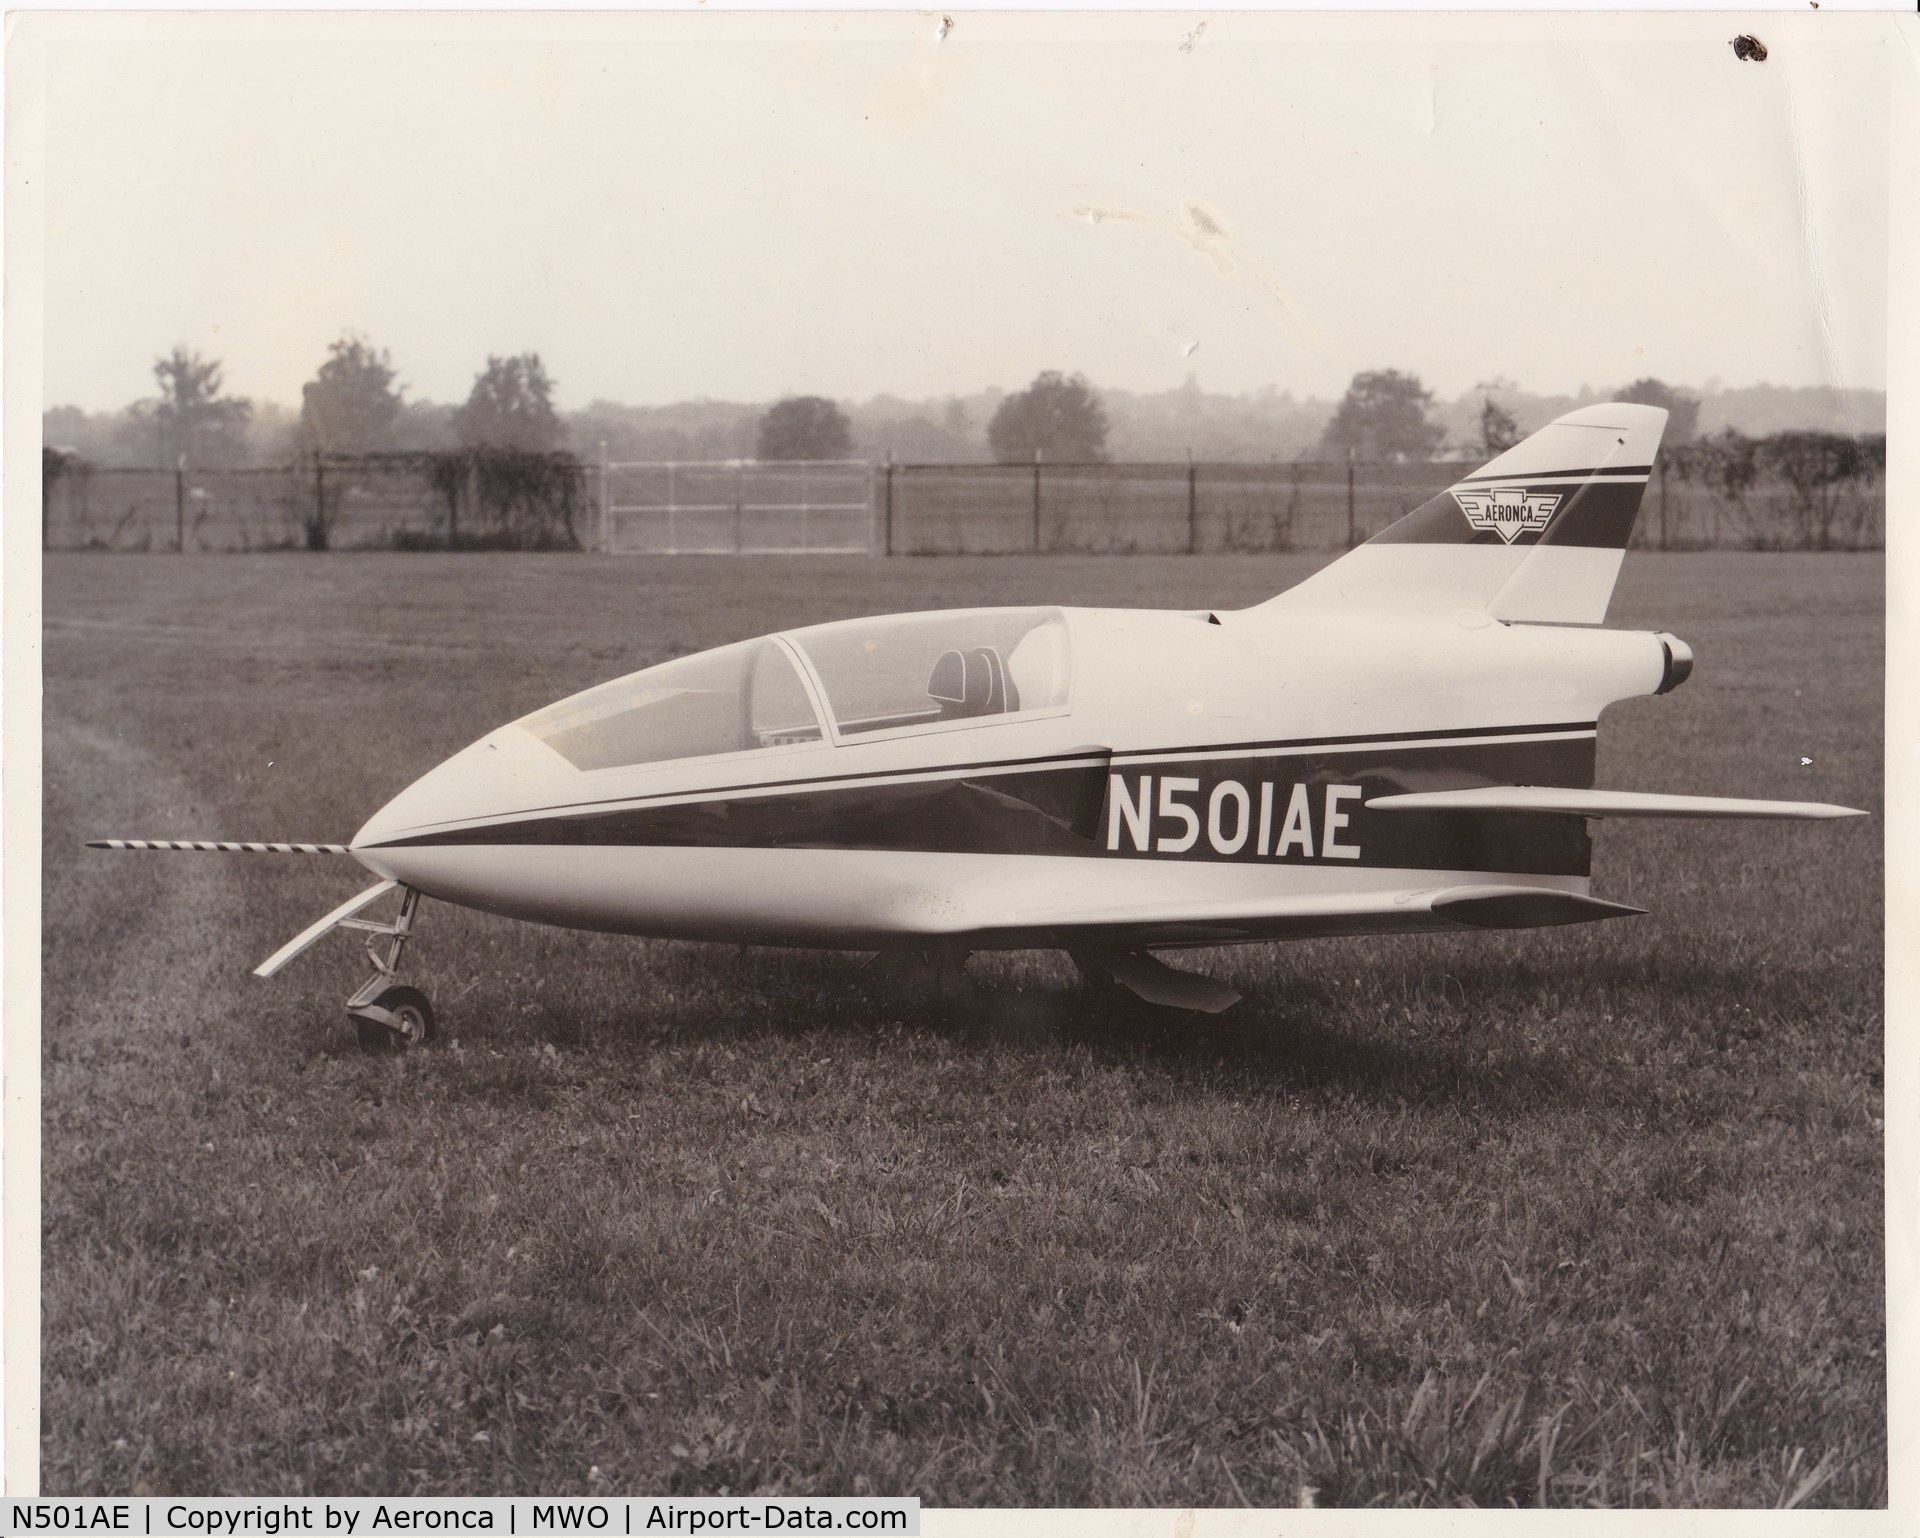 N501AE, 1975 Bede BD-5J C/N 001, Photo taken at Aeronca factory in Middletown, Ohio, unkown date, found in estate paperwork of an employee.